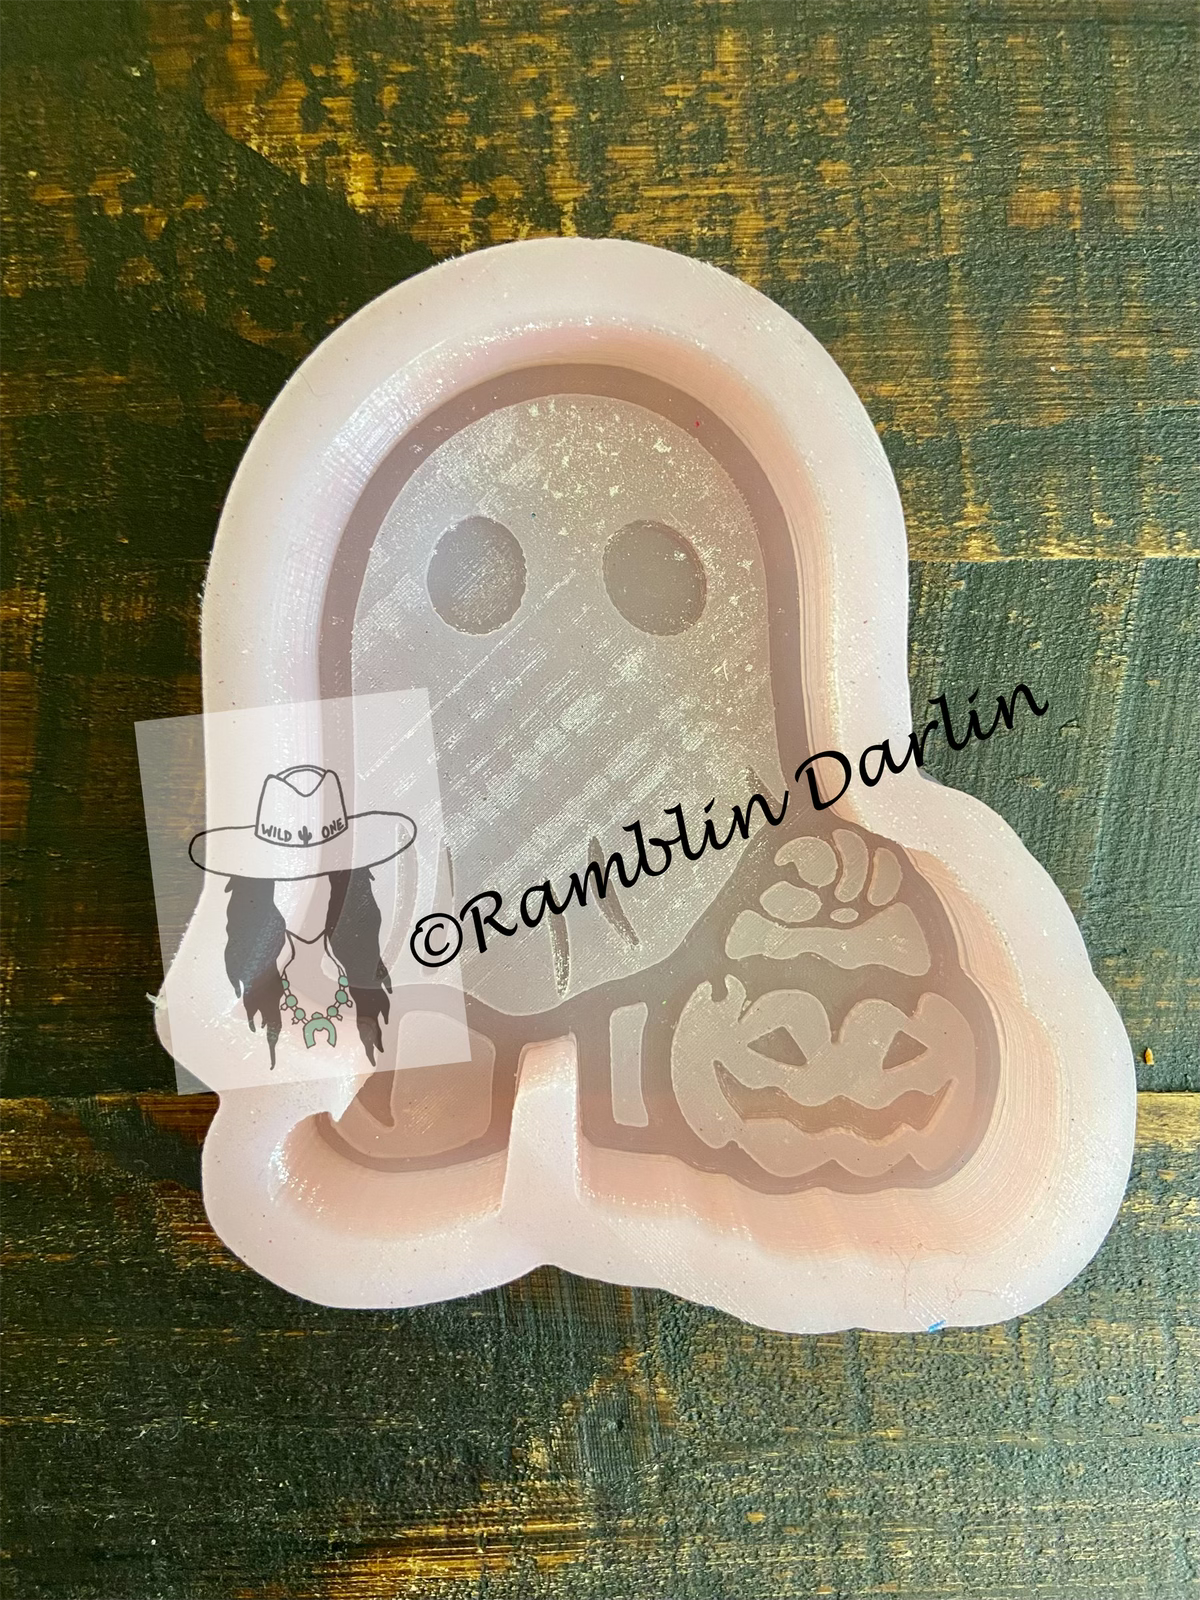 Trick or Treater Mold